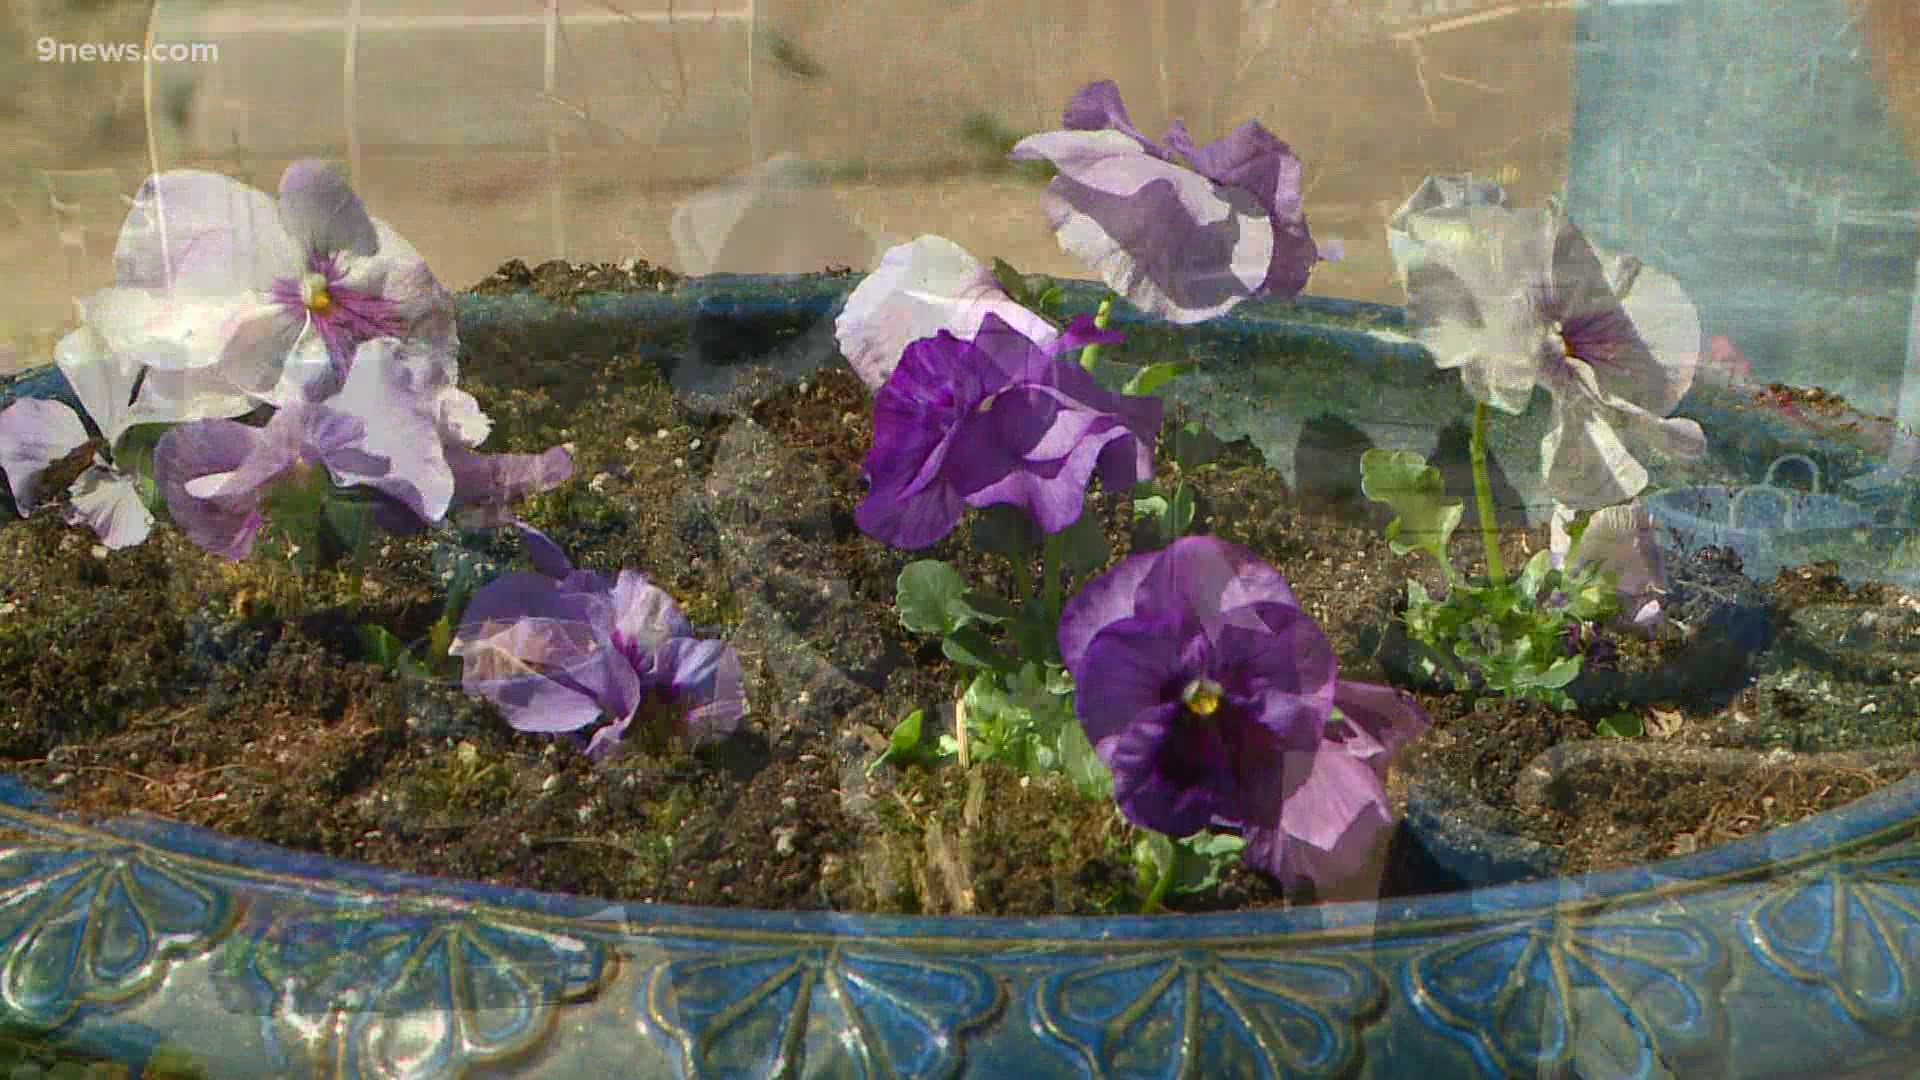 Garden expert Rob Proctor suggests using pansies as the perfect companion for your spring bulbs.